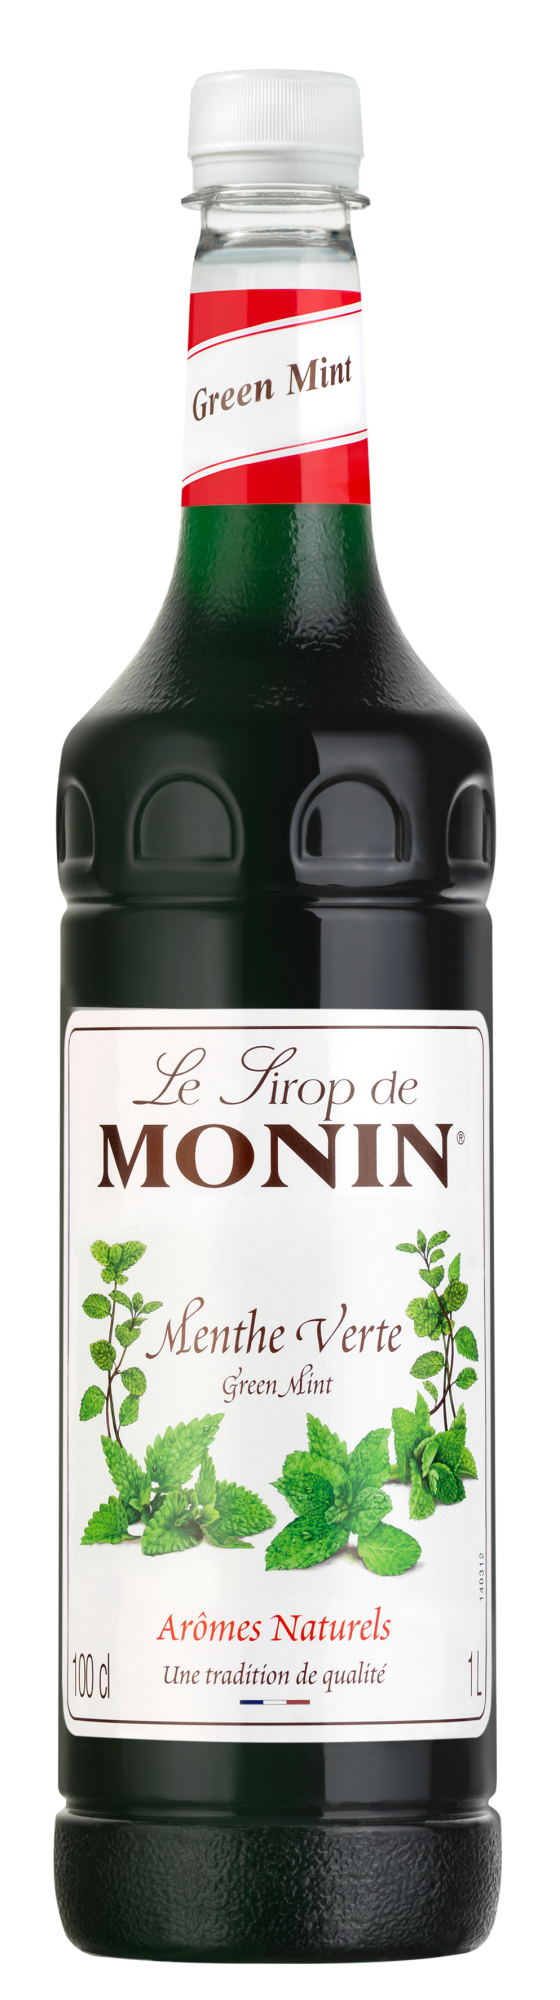 Buy MONIN Green Mint Syrup. Traditionally mixed with water or lemonade in French culture for generations.